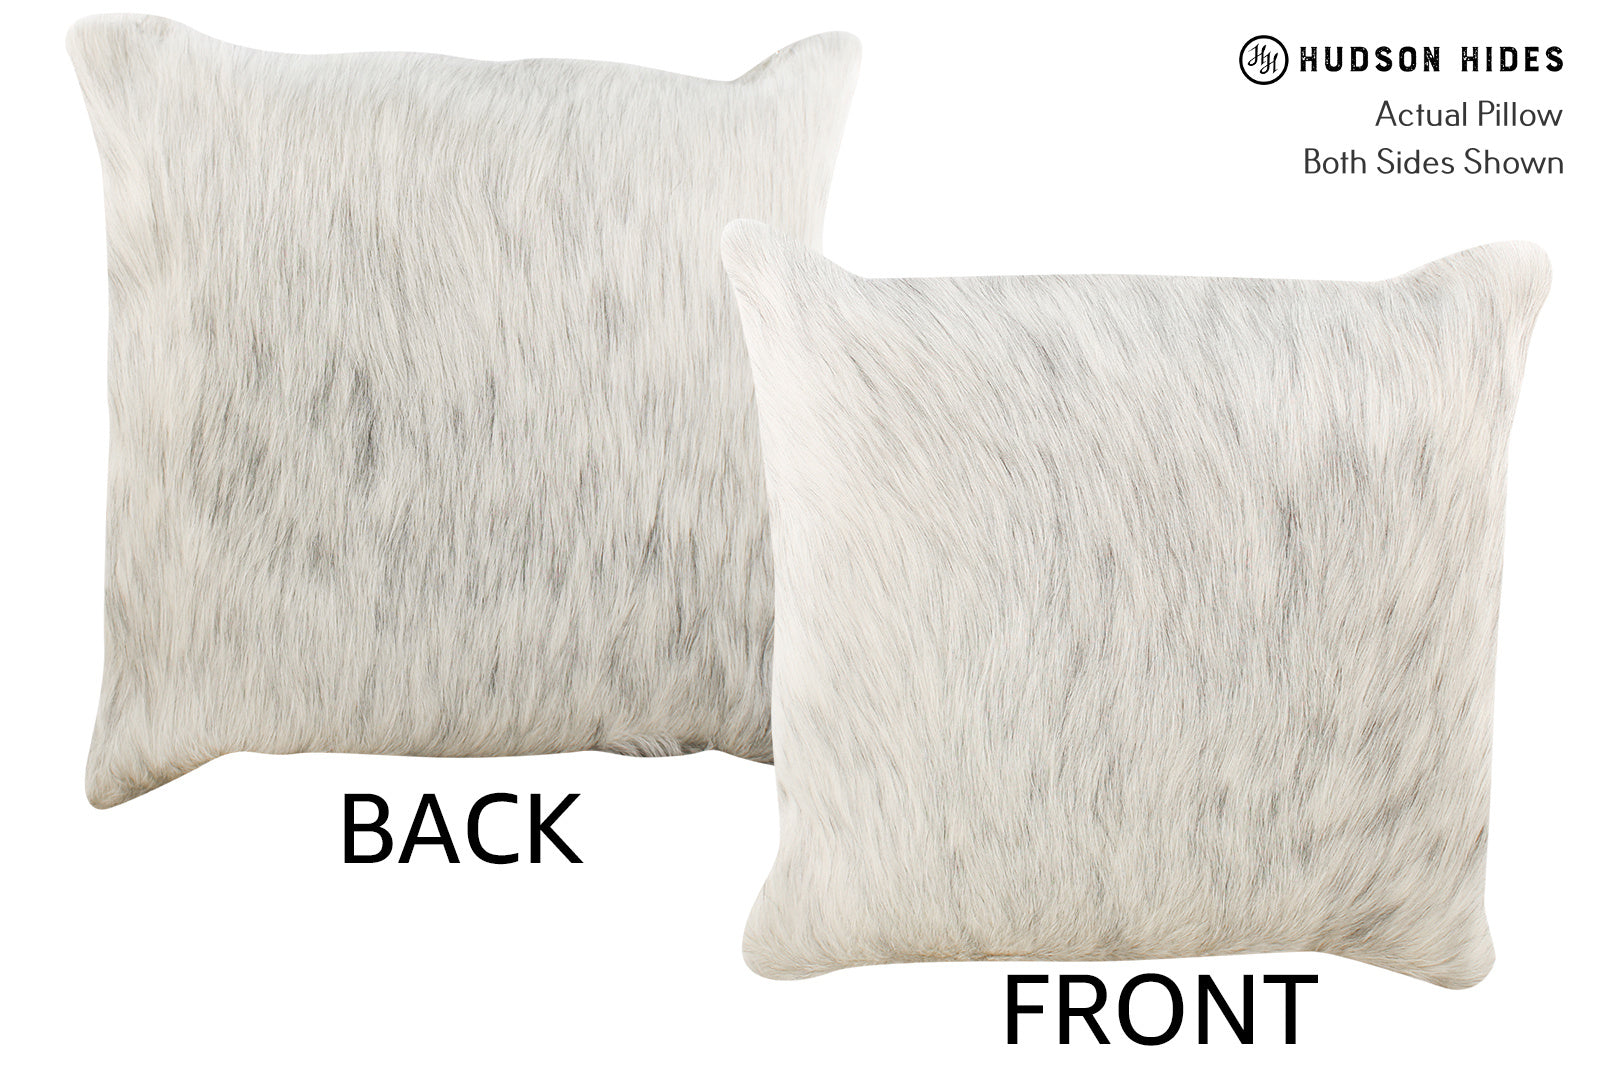 Black and White Cowhide Pillow #34736